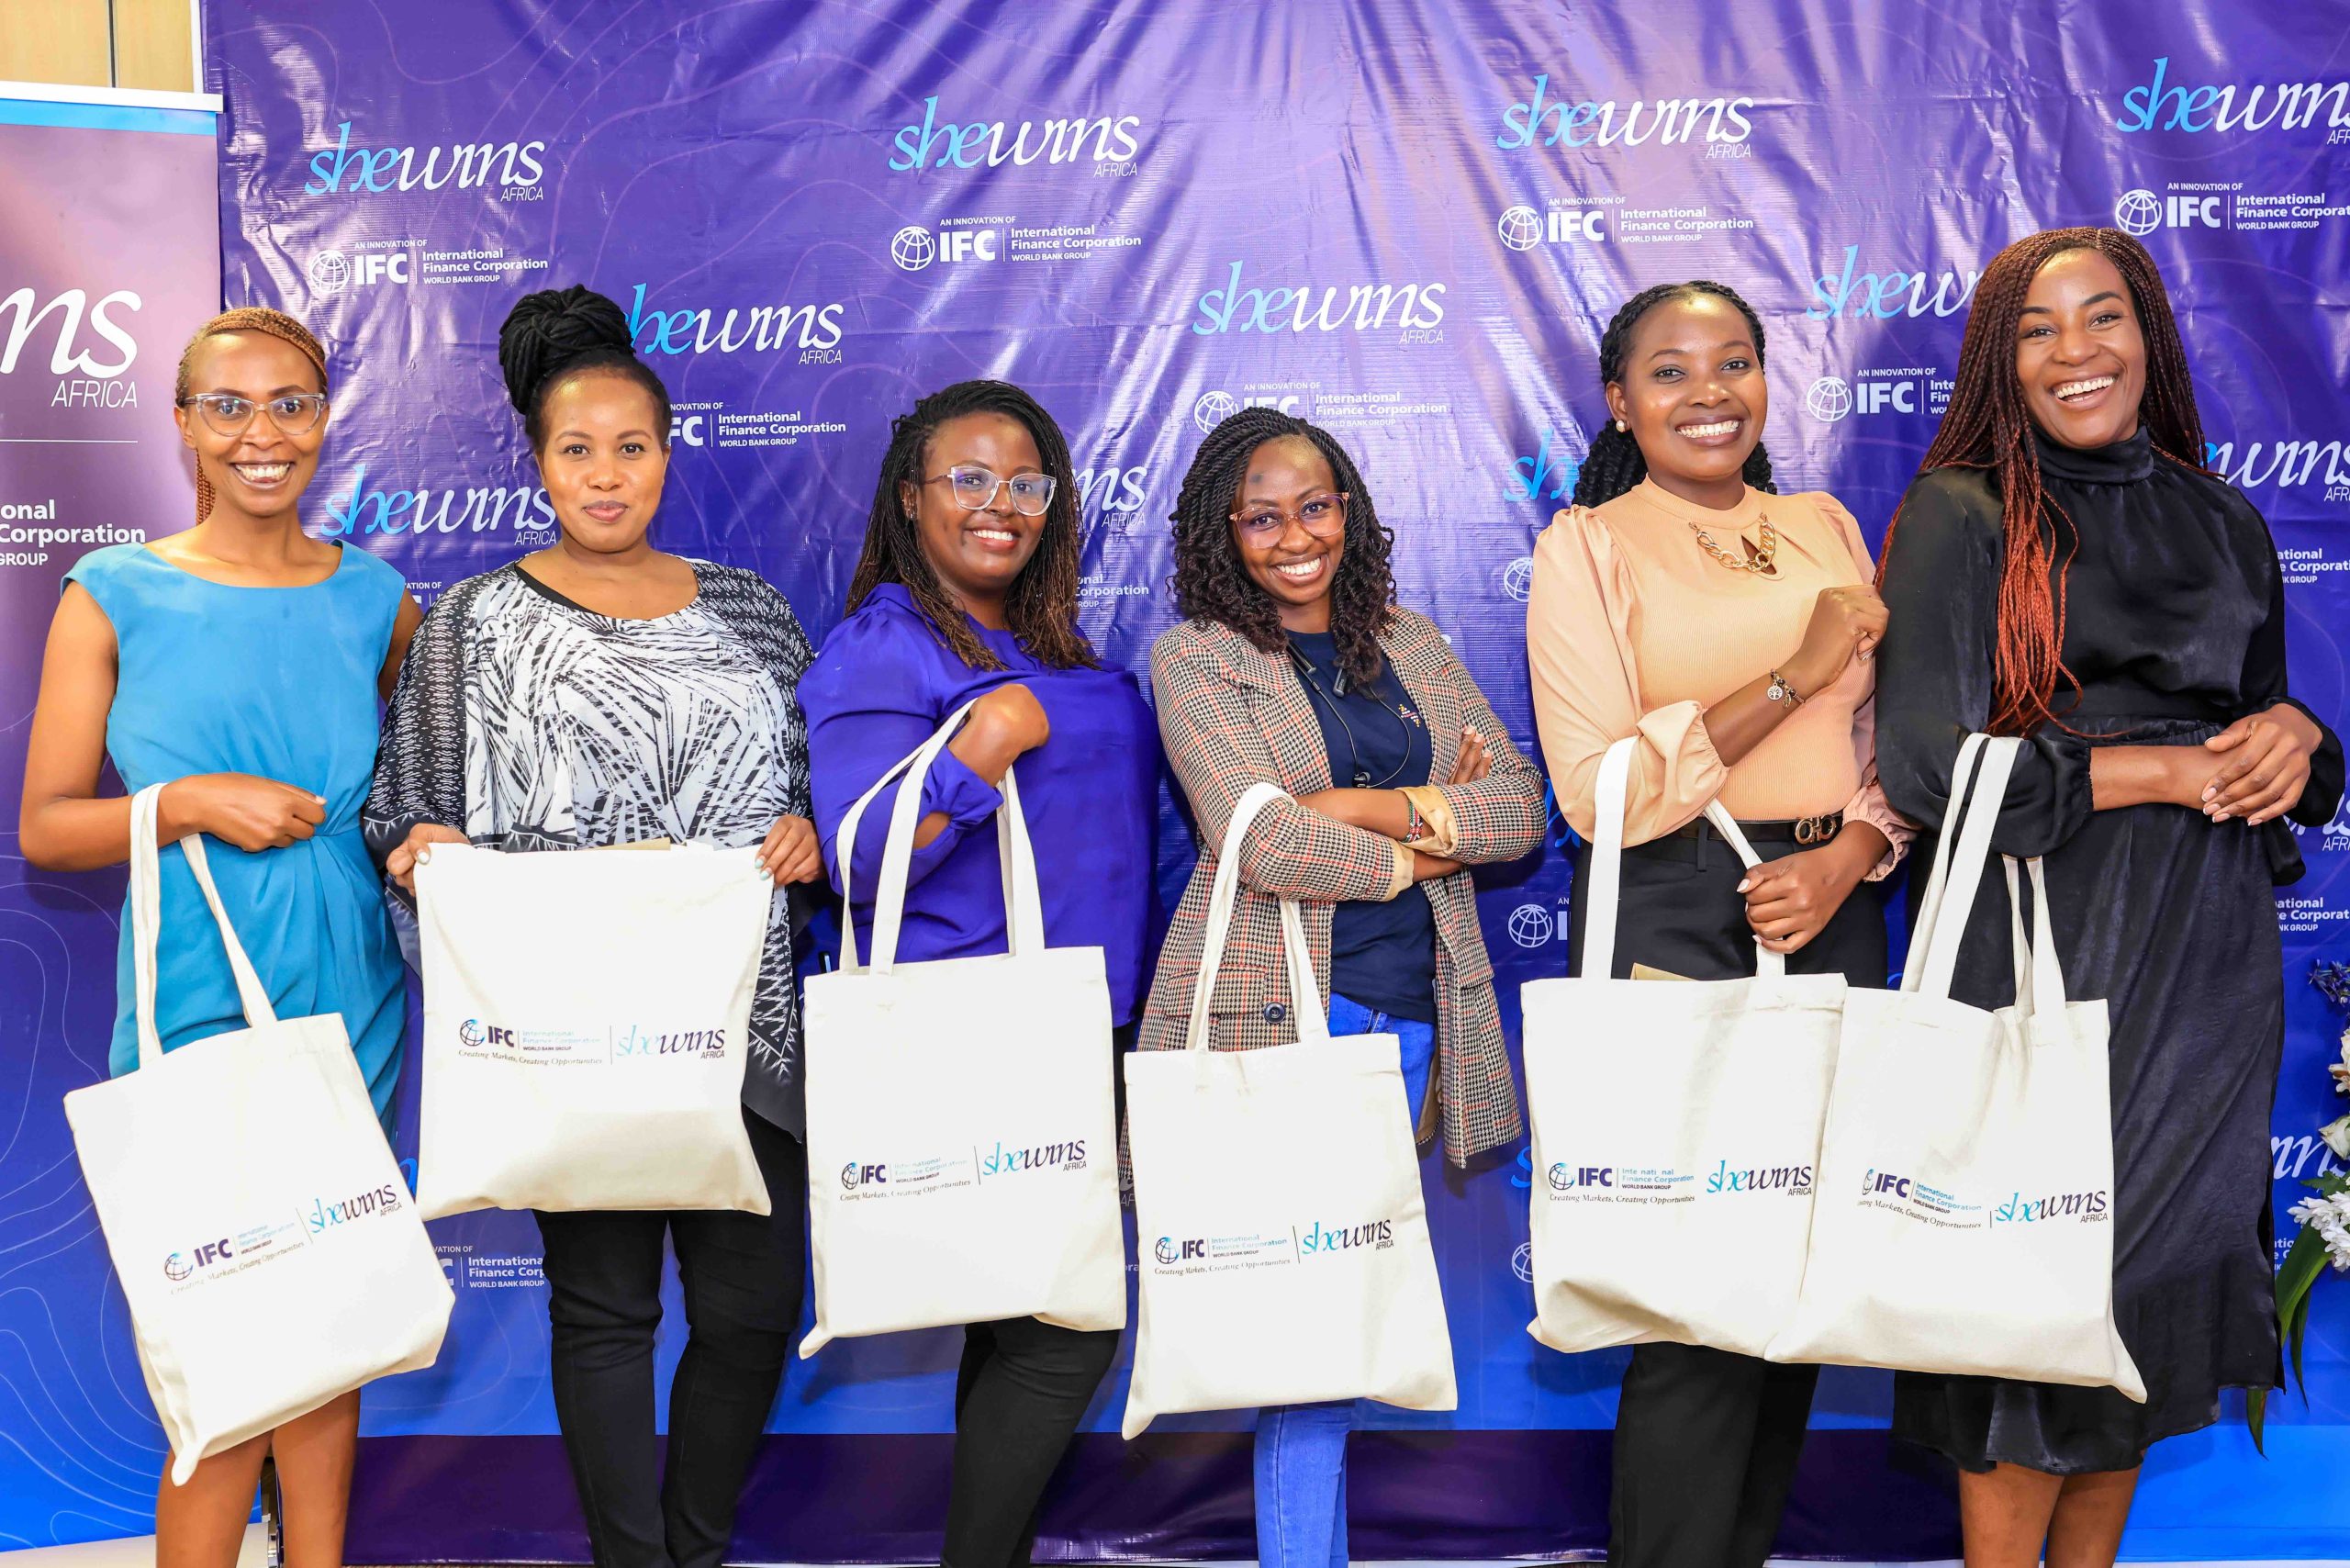 IFC-Announces-100-Women-Start-ups-to-Receive-Growth-Support-Through-She-Wins-Africa-2